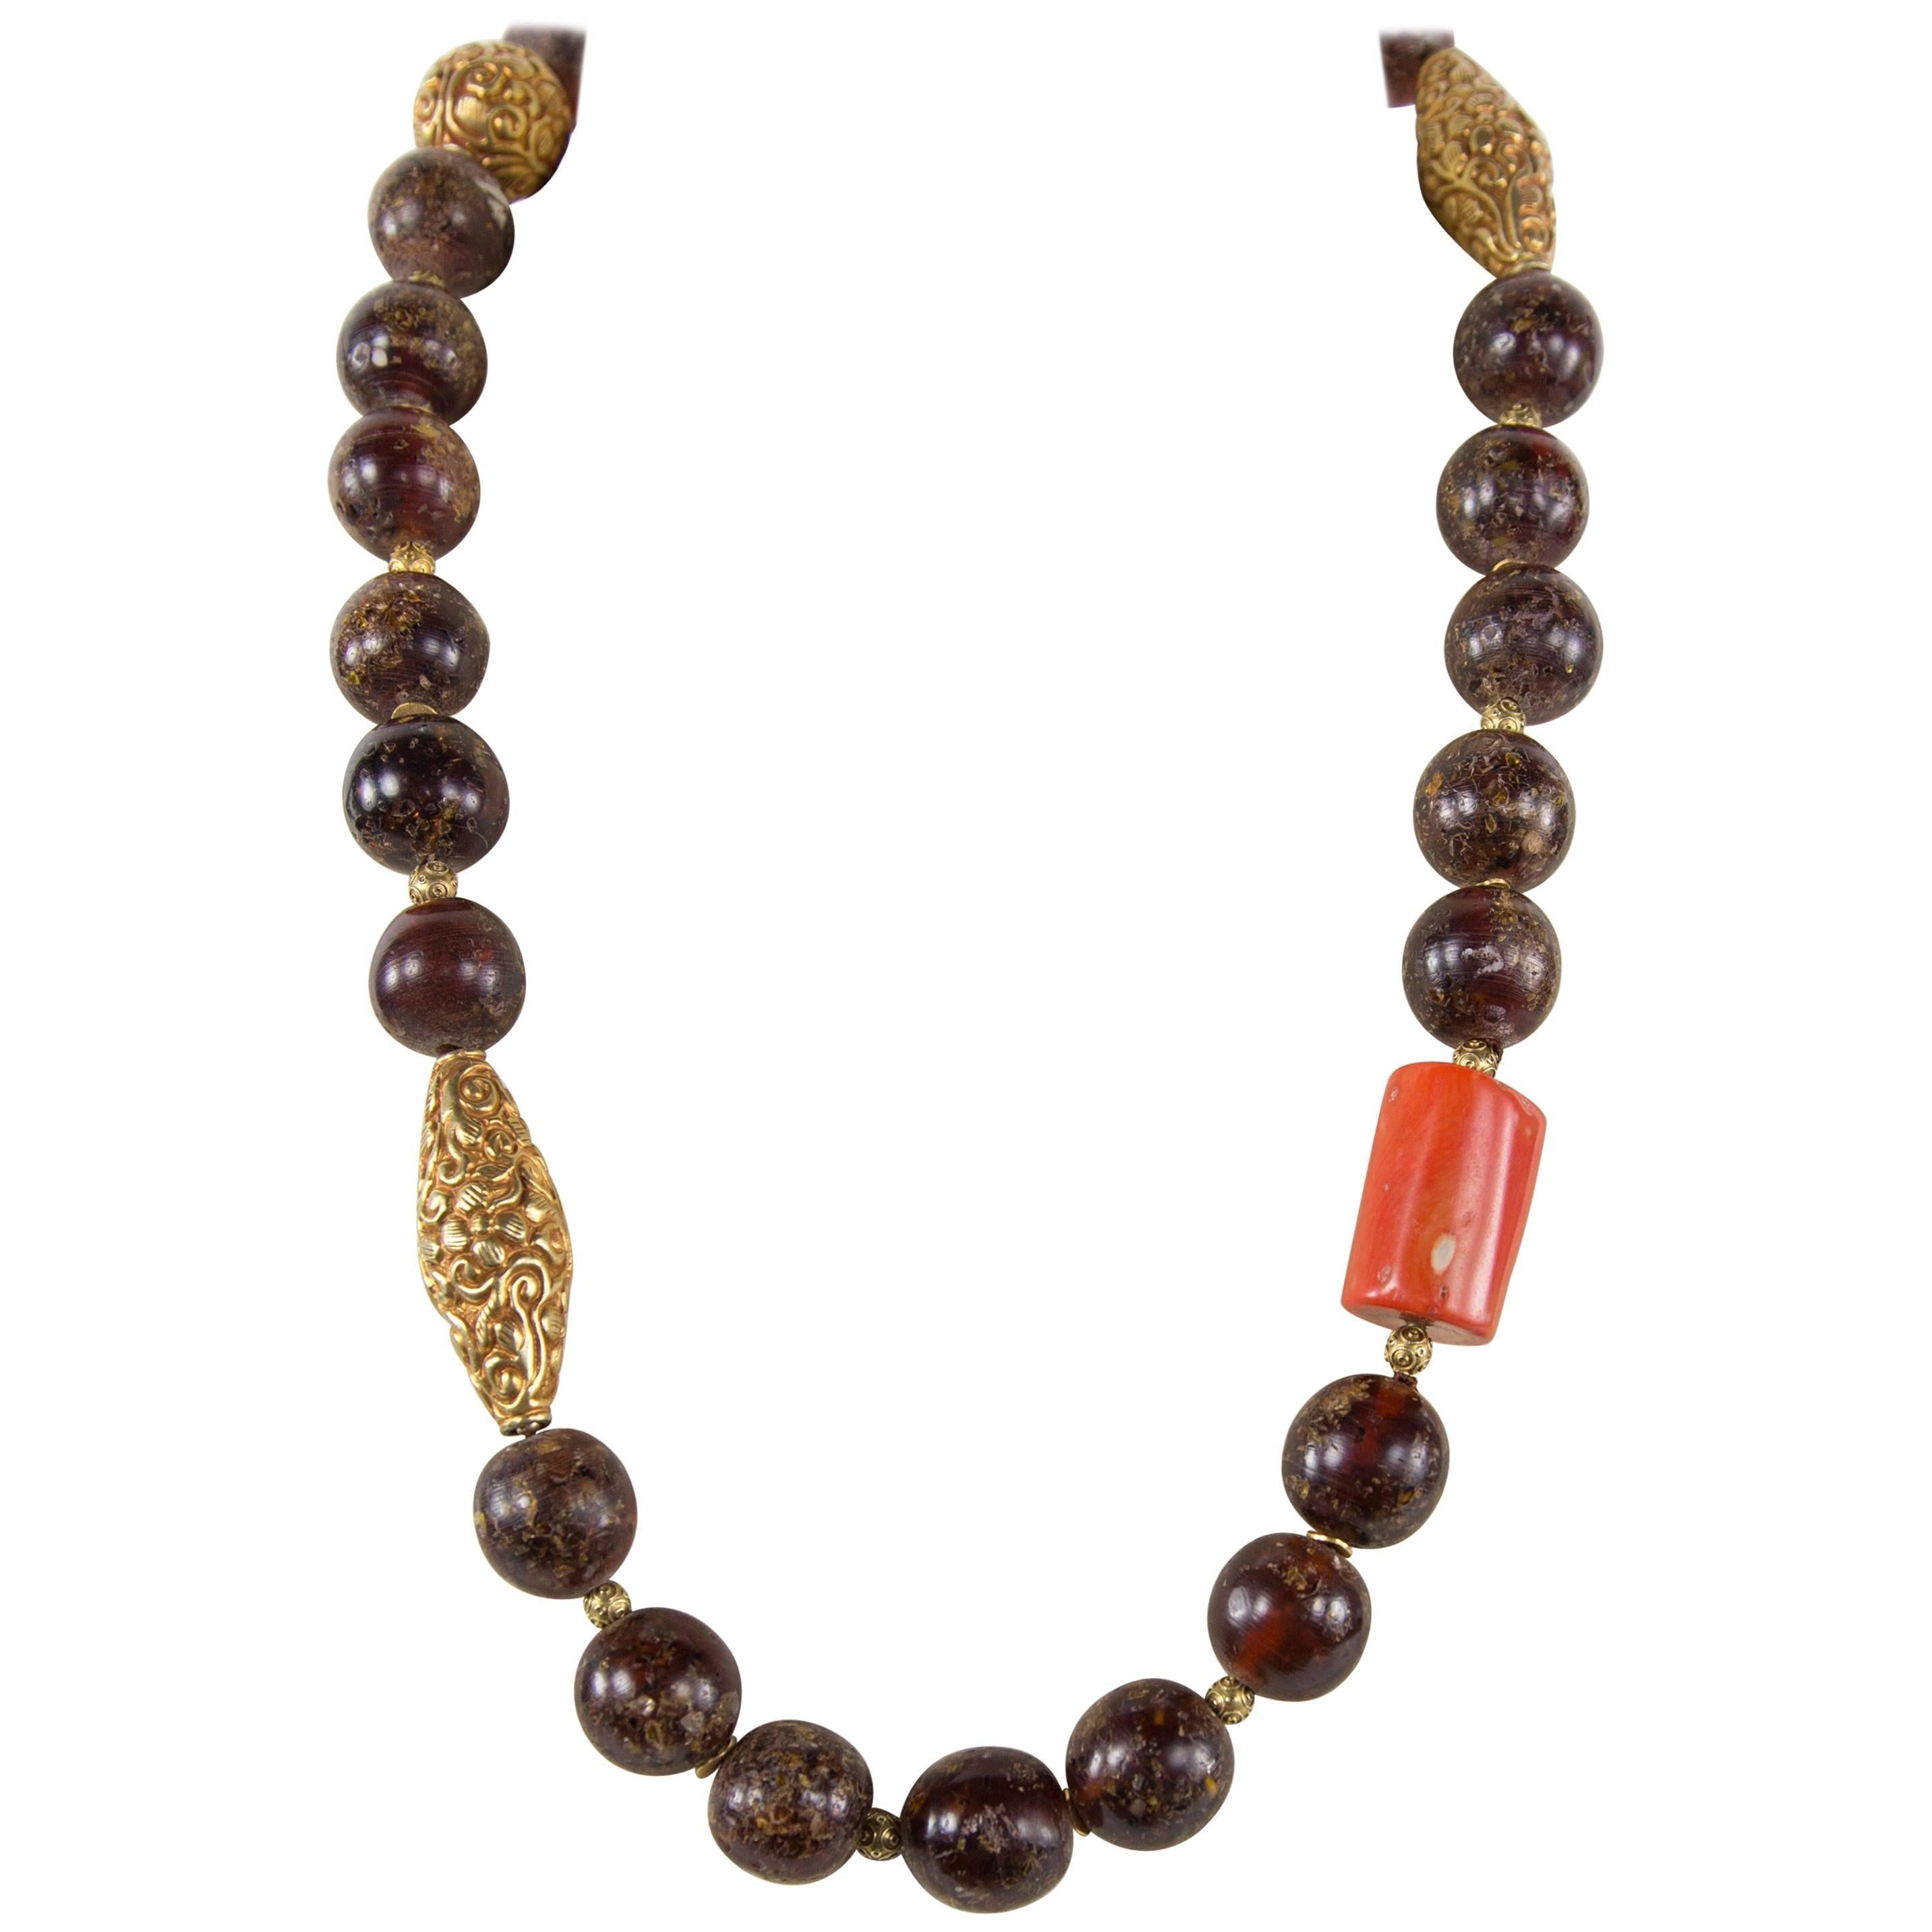 Fabulous Antique Tibetan Natural Amber Coral and Gold Beads Heirloom Necklace